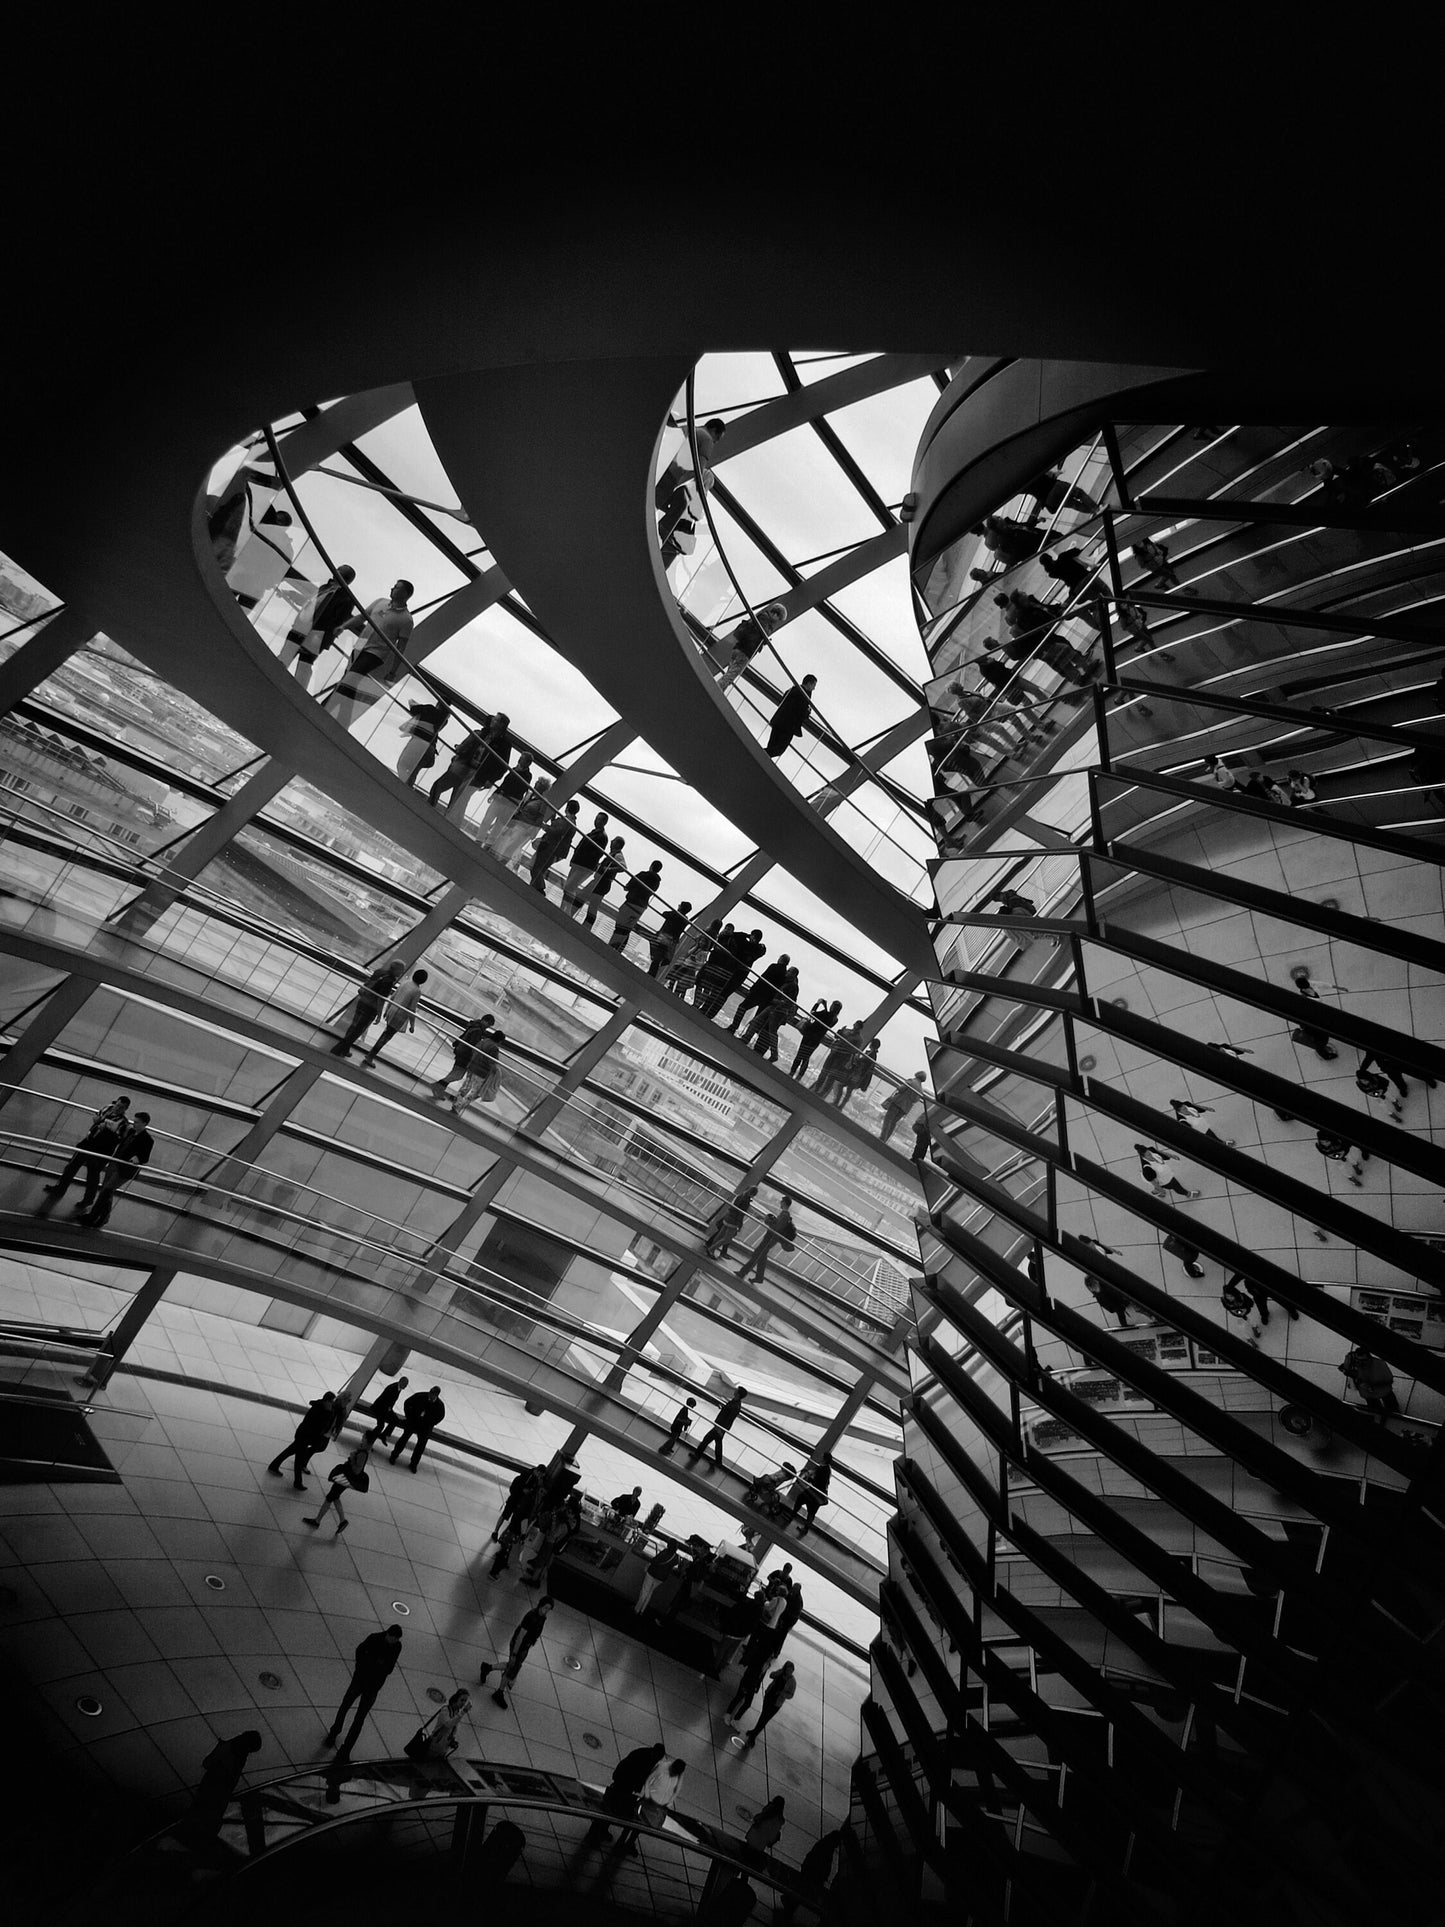 Berlin Reichstag Dome Black And White Photography Poster